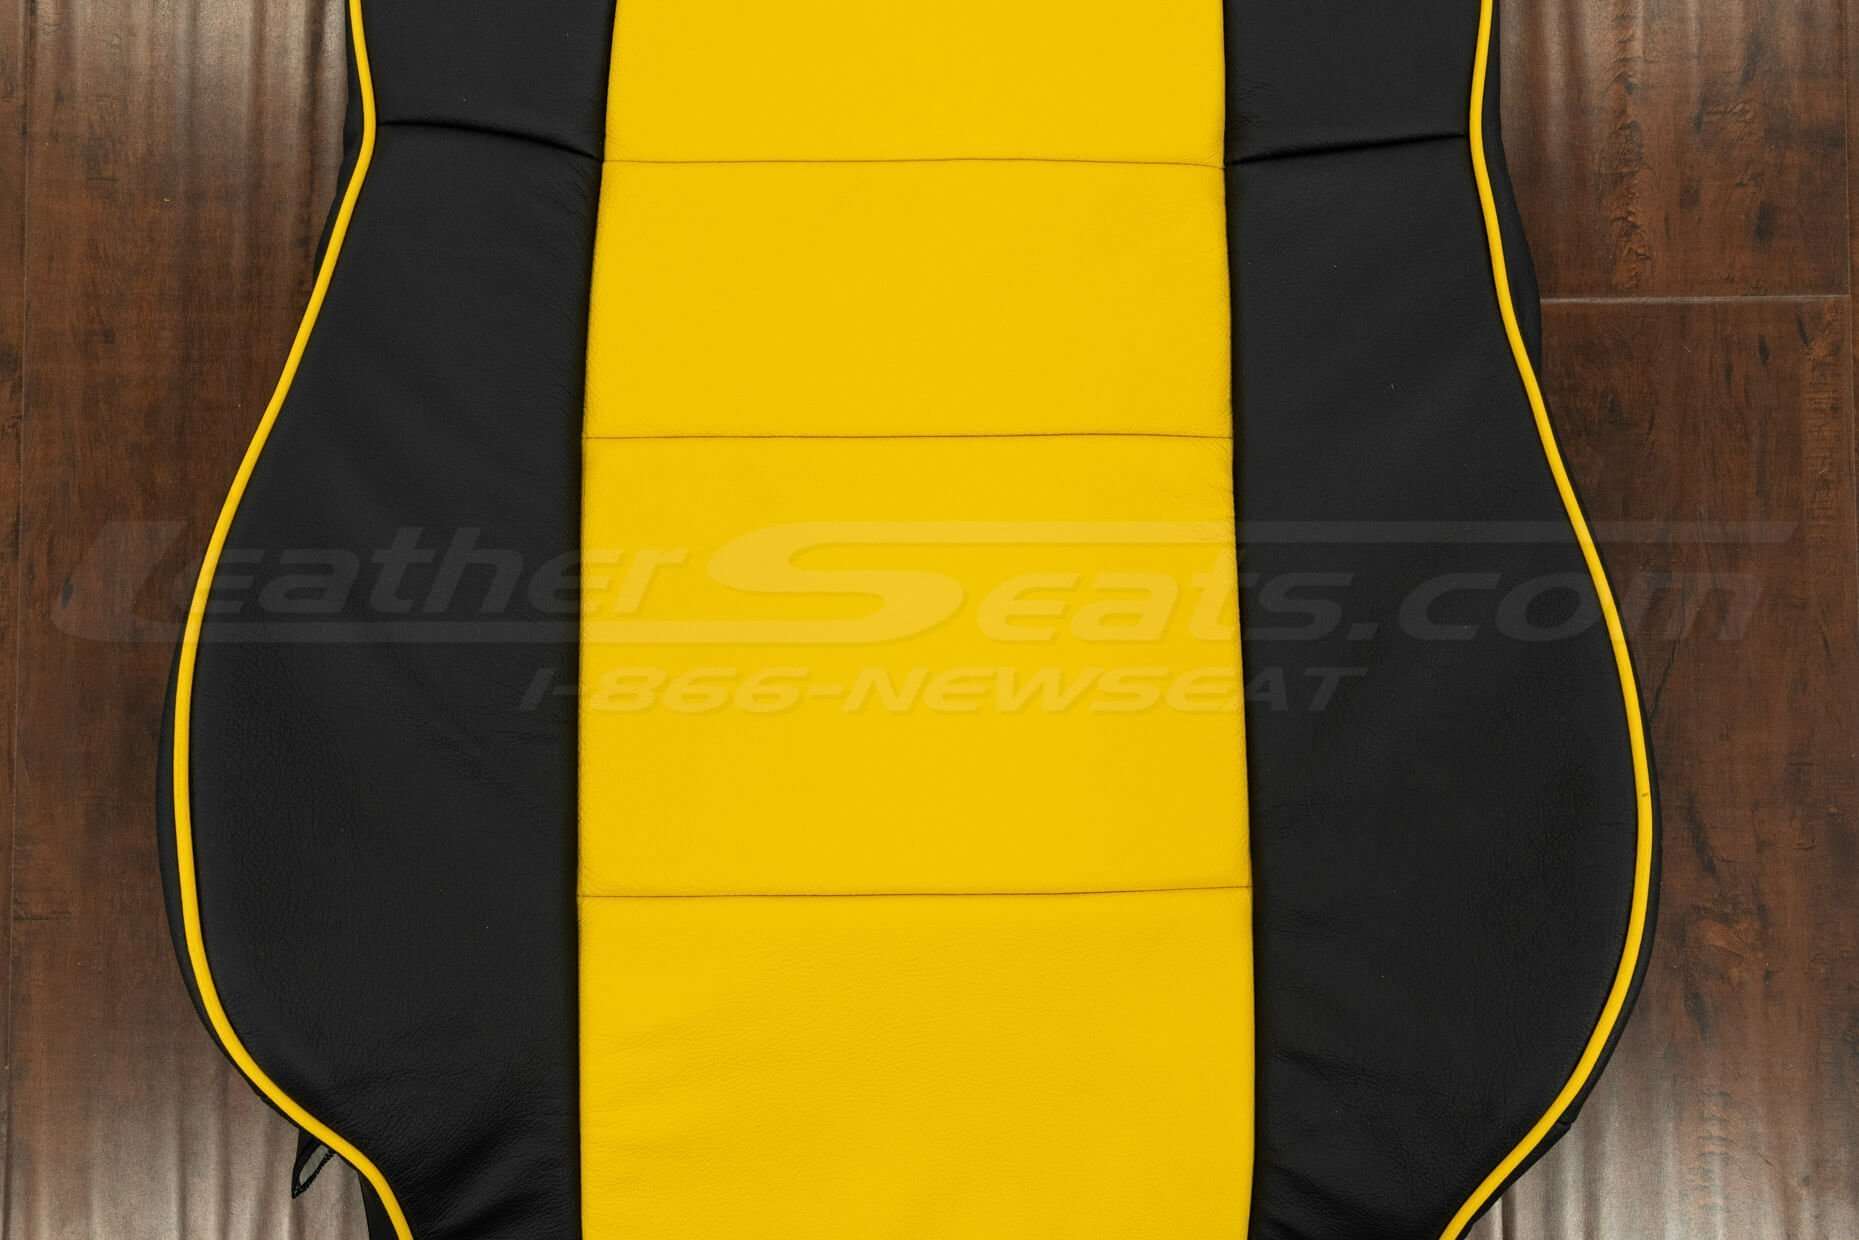 Velocity Yellow Centers on front backrest